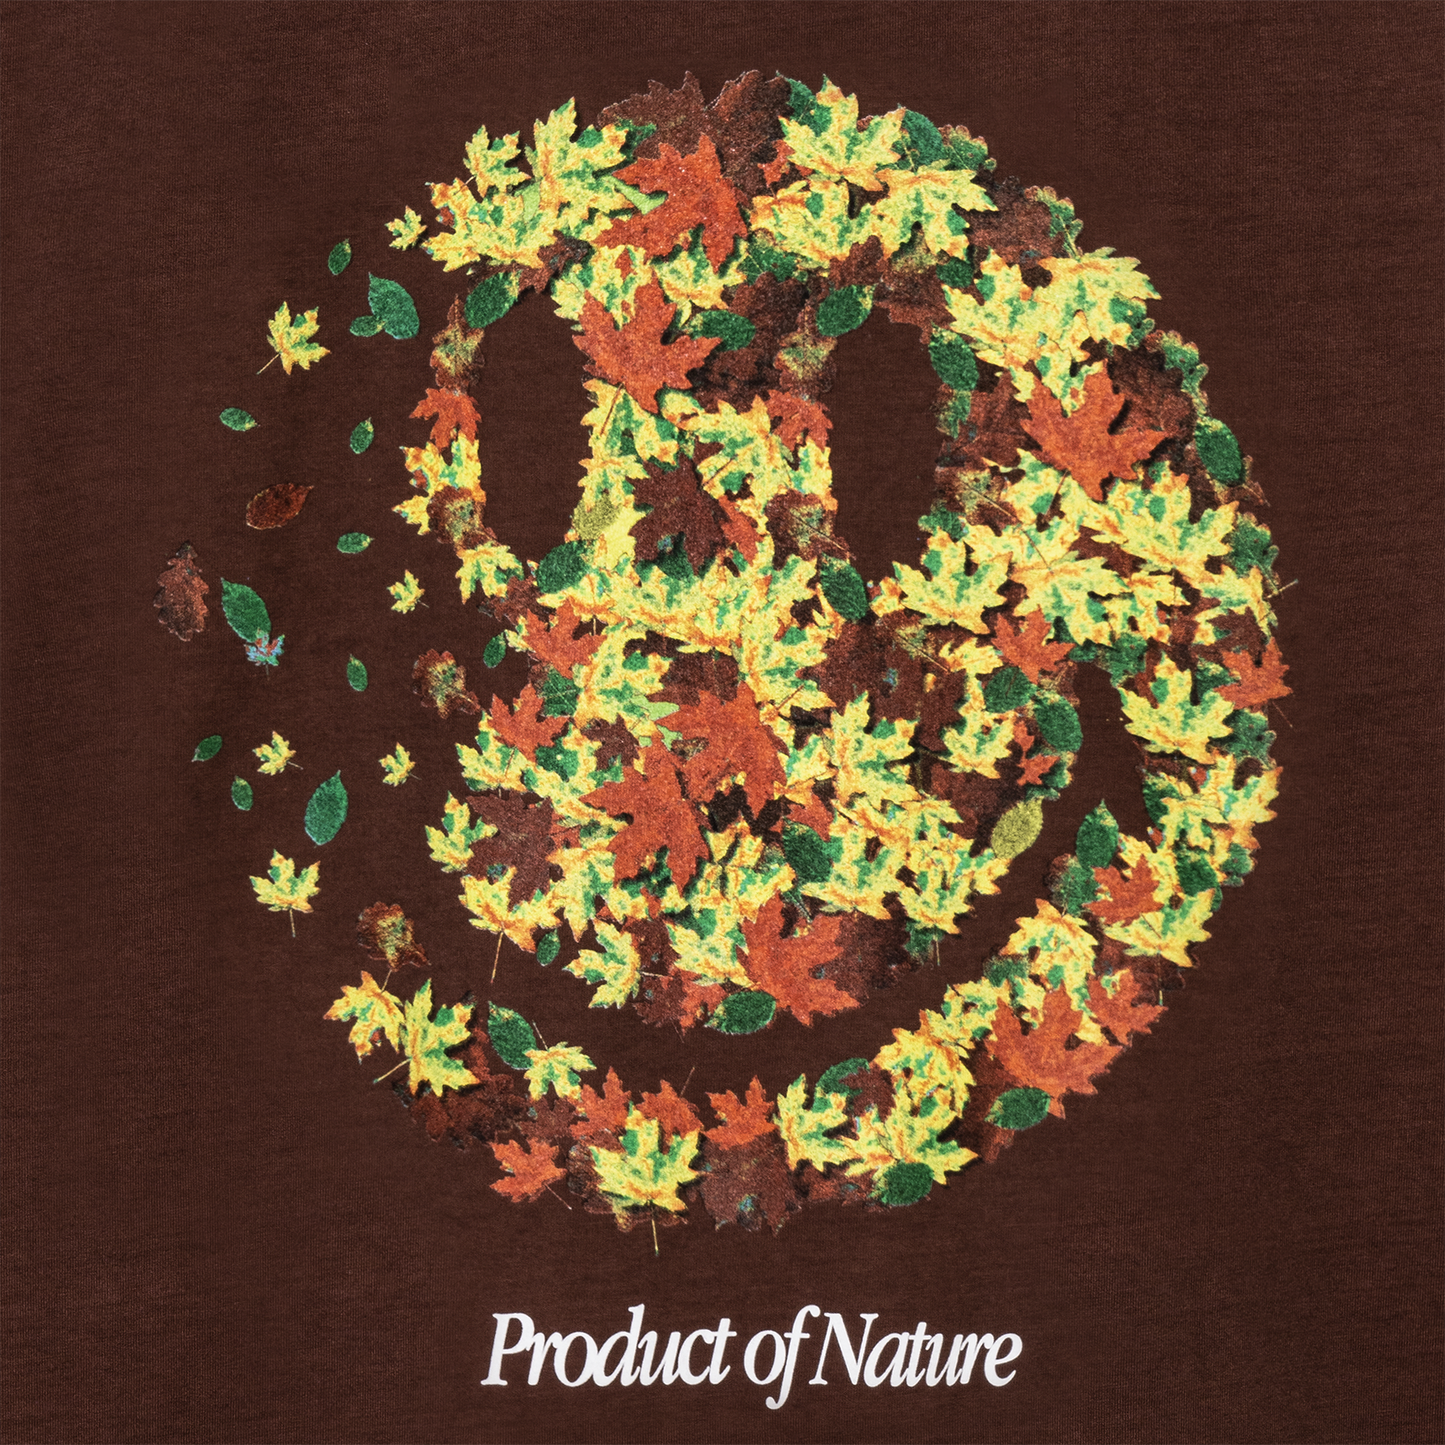 SMILEY PRODUCT OF NATURE T-SHIRT